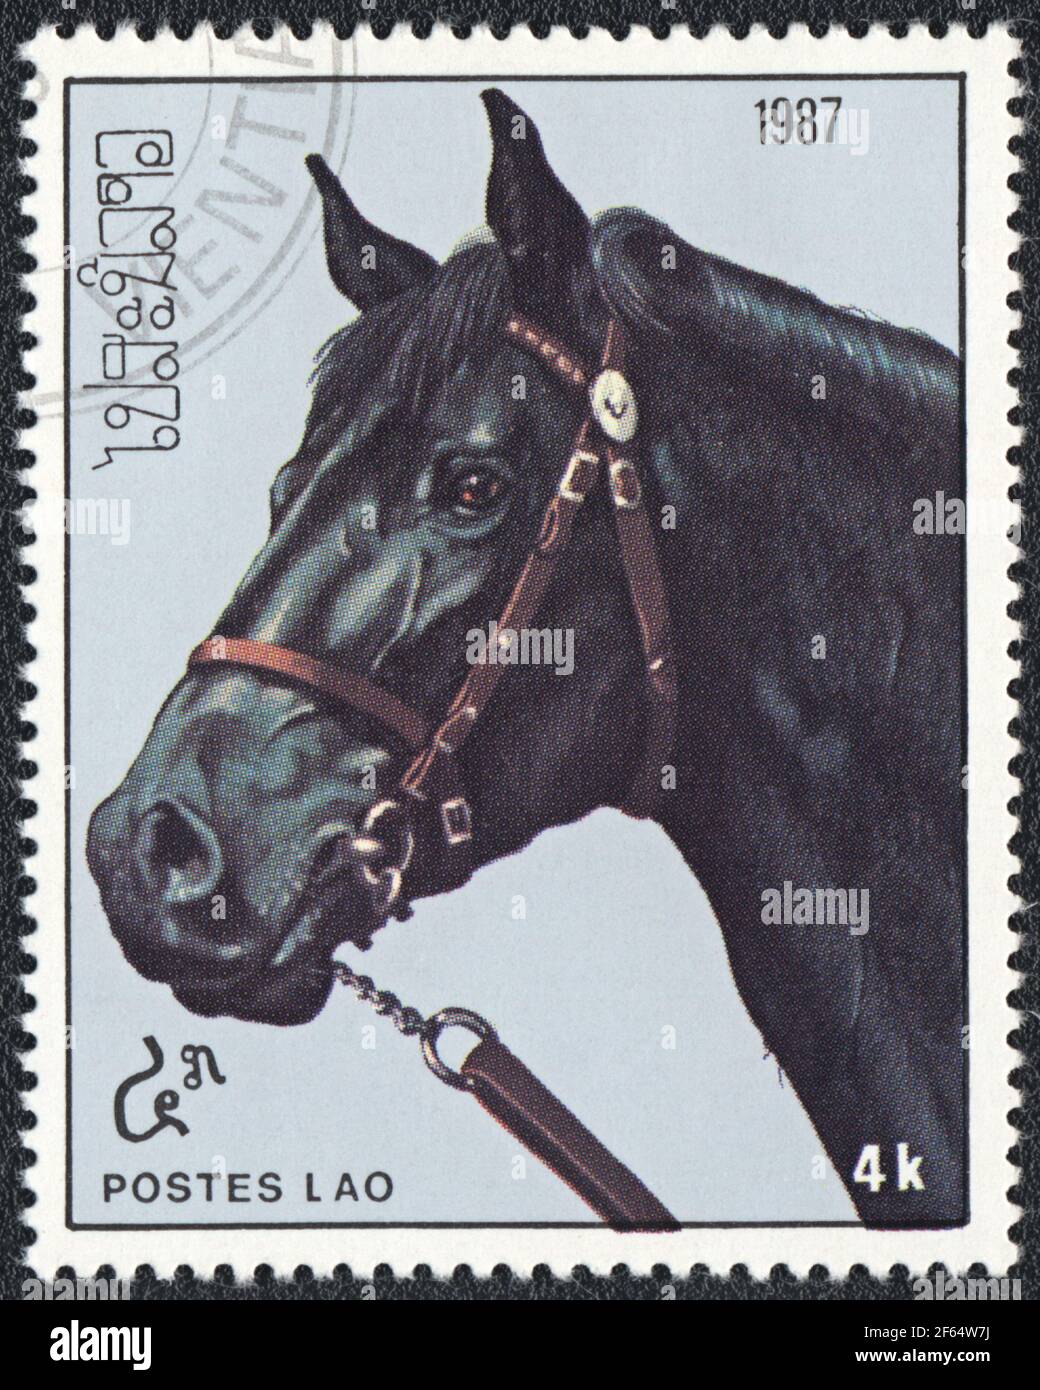 A postage stamp shows a black horse (Equus ferus caballus) from series: Thoroughbred Horses, Laos, 1987 Stock Photo